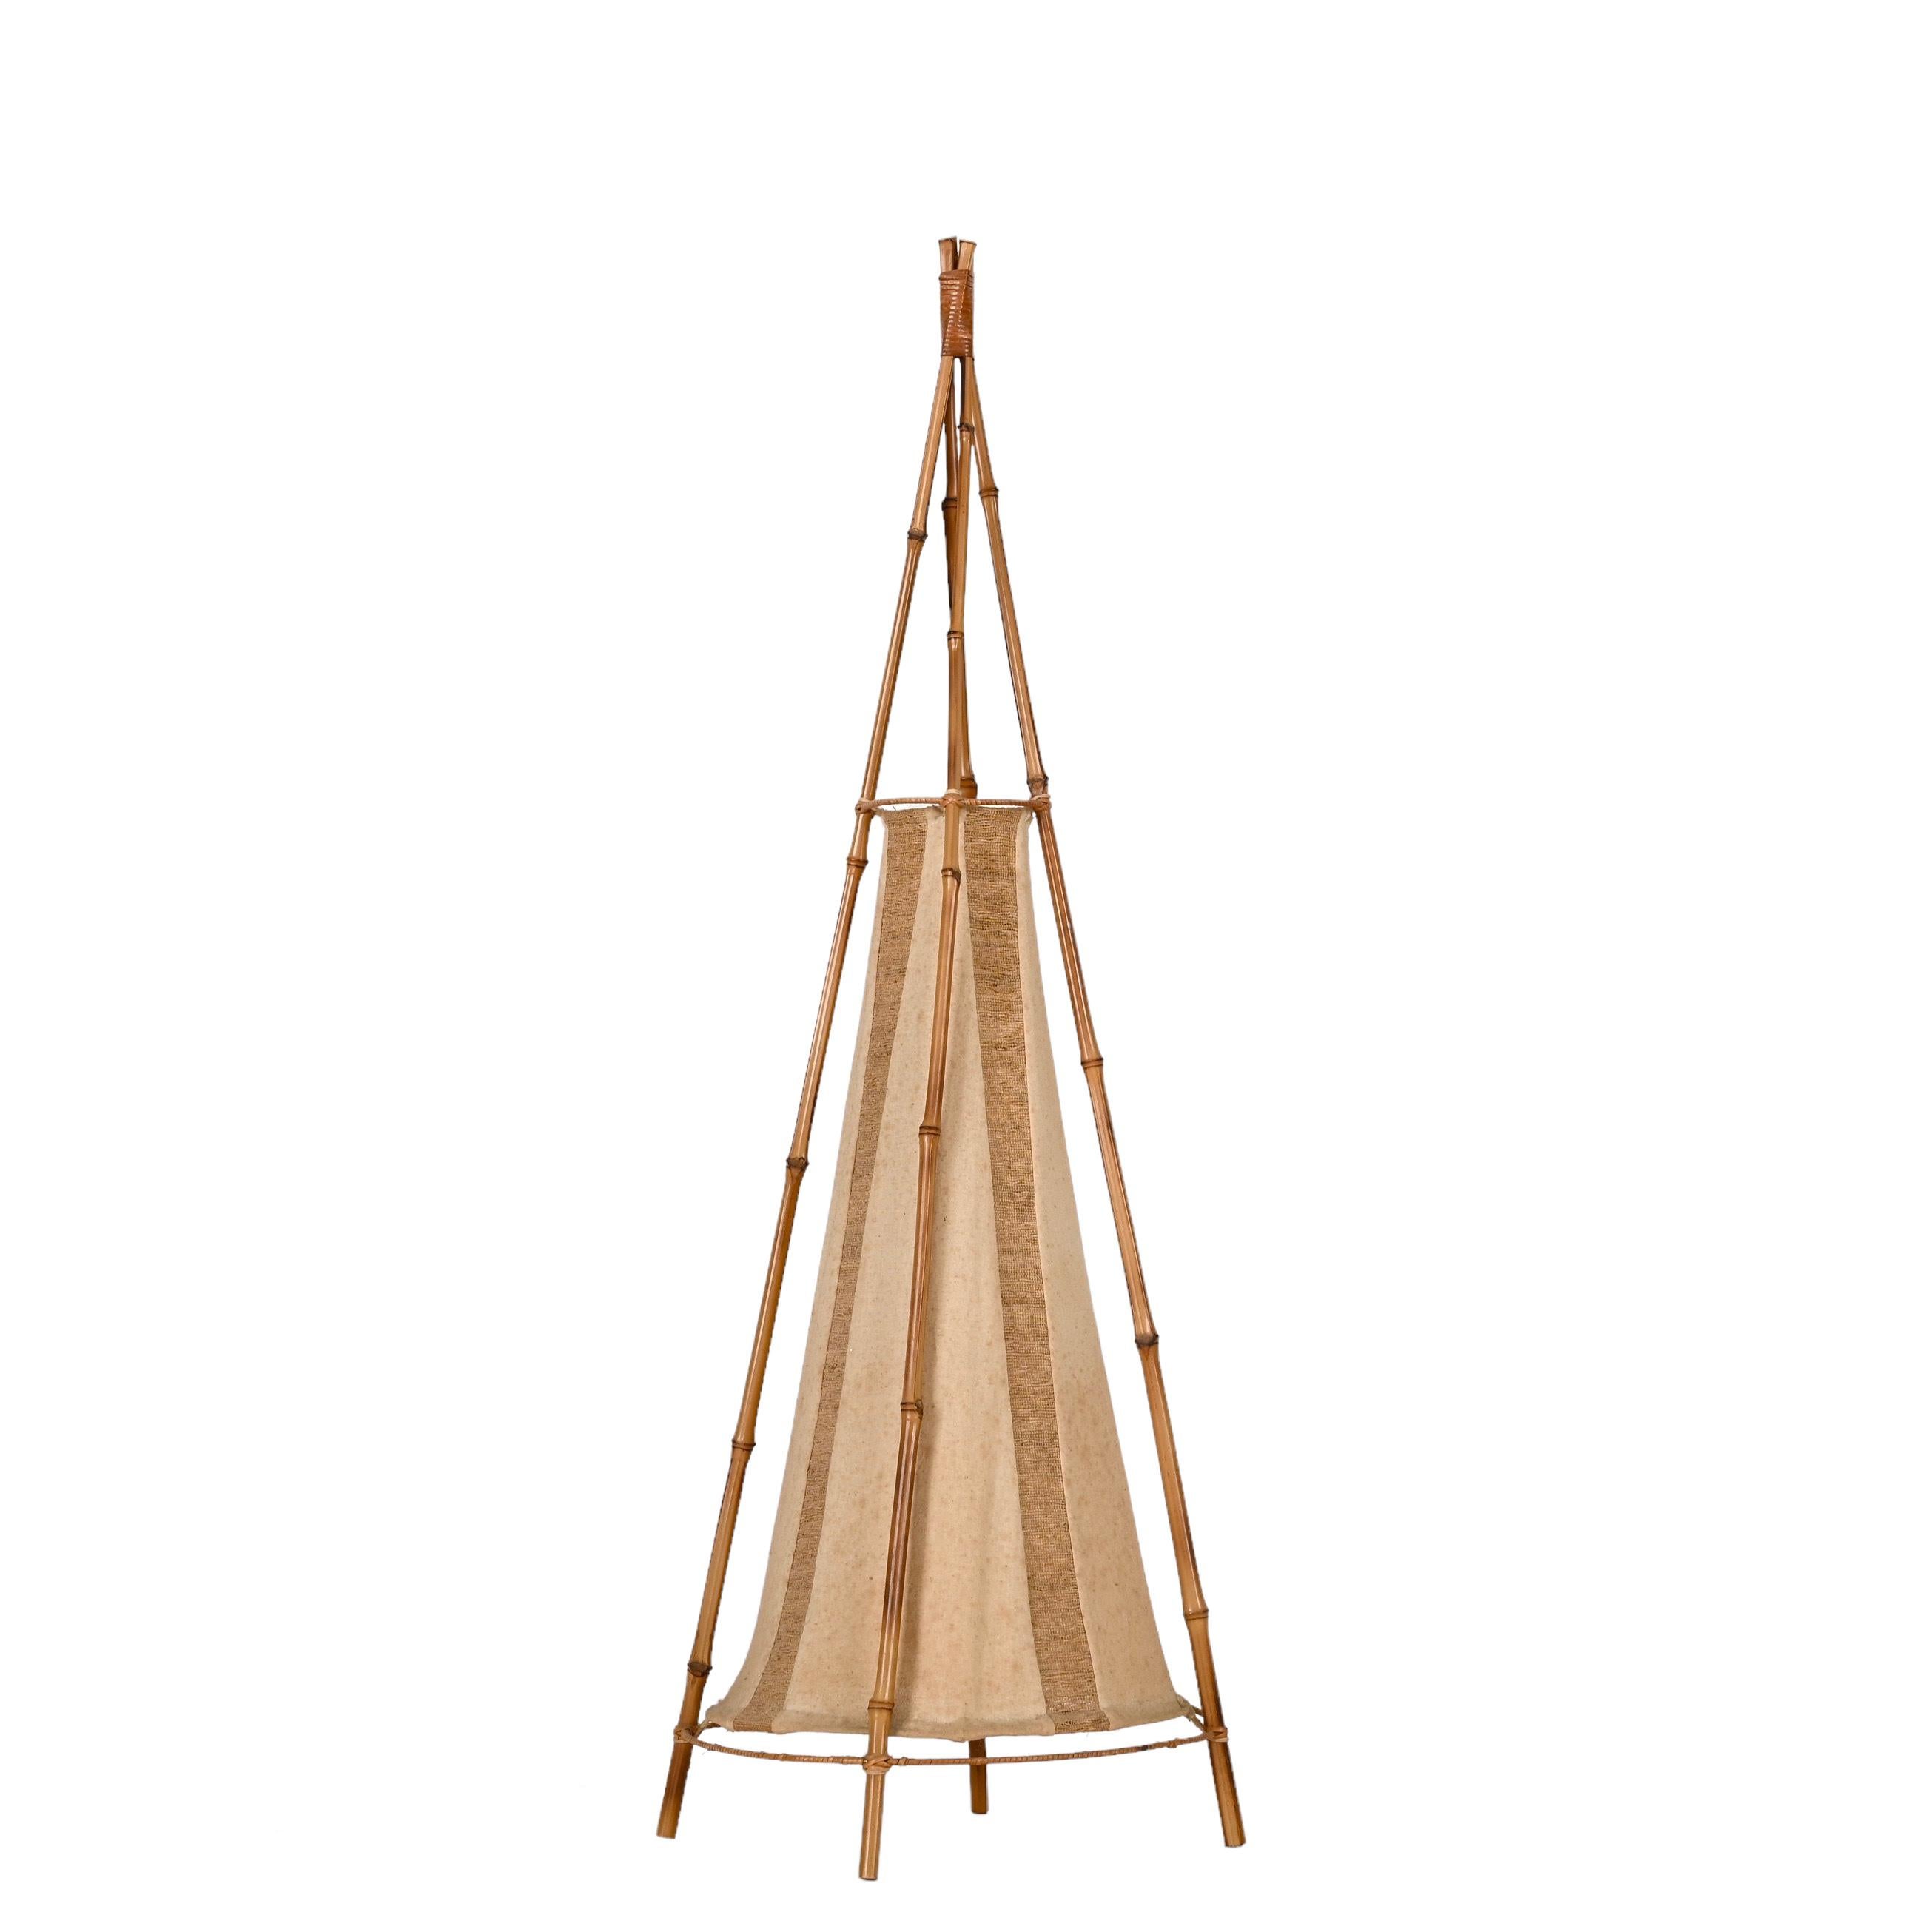 Stunning mid-century American Indian tent-shaped table or floor lamp in bamboo and rattan. This wonderful big lamp was made in Italy during the 1960s in the style of Louis Sognot.

The outer structure is made up of four bamboo and rattan bamboo